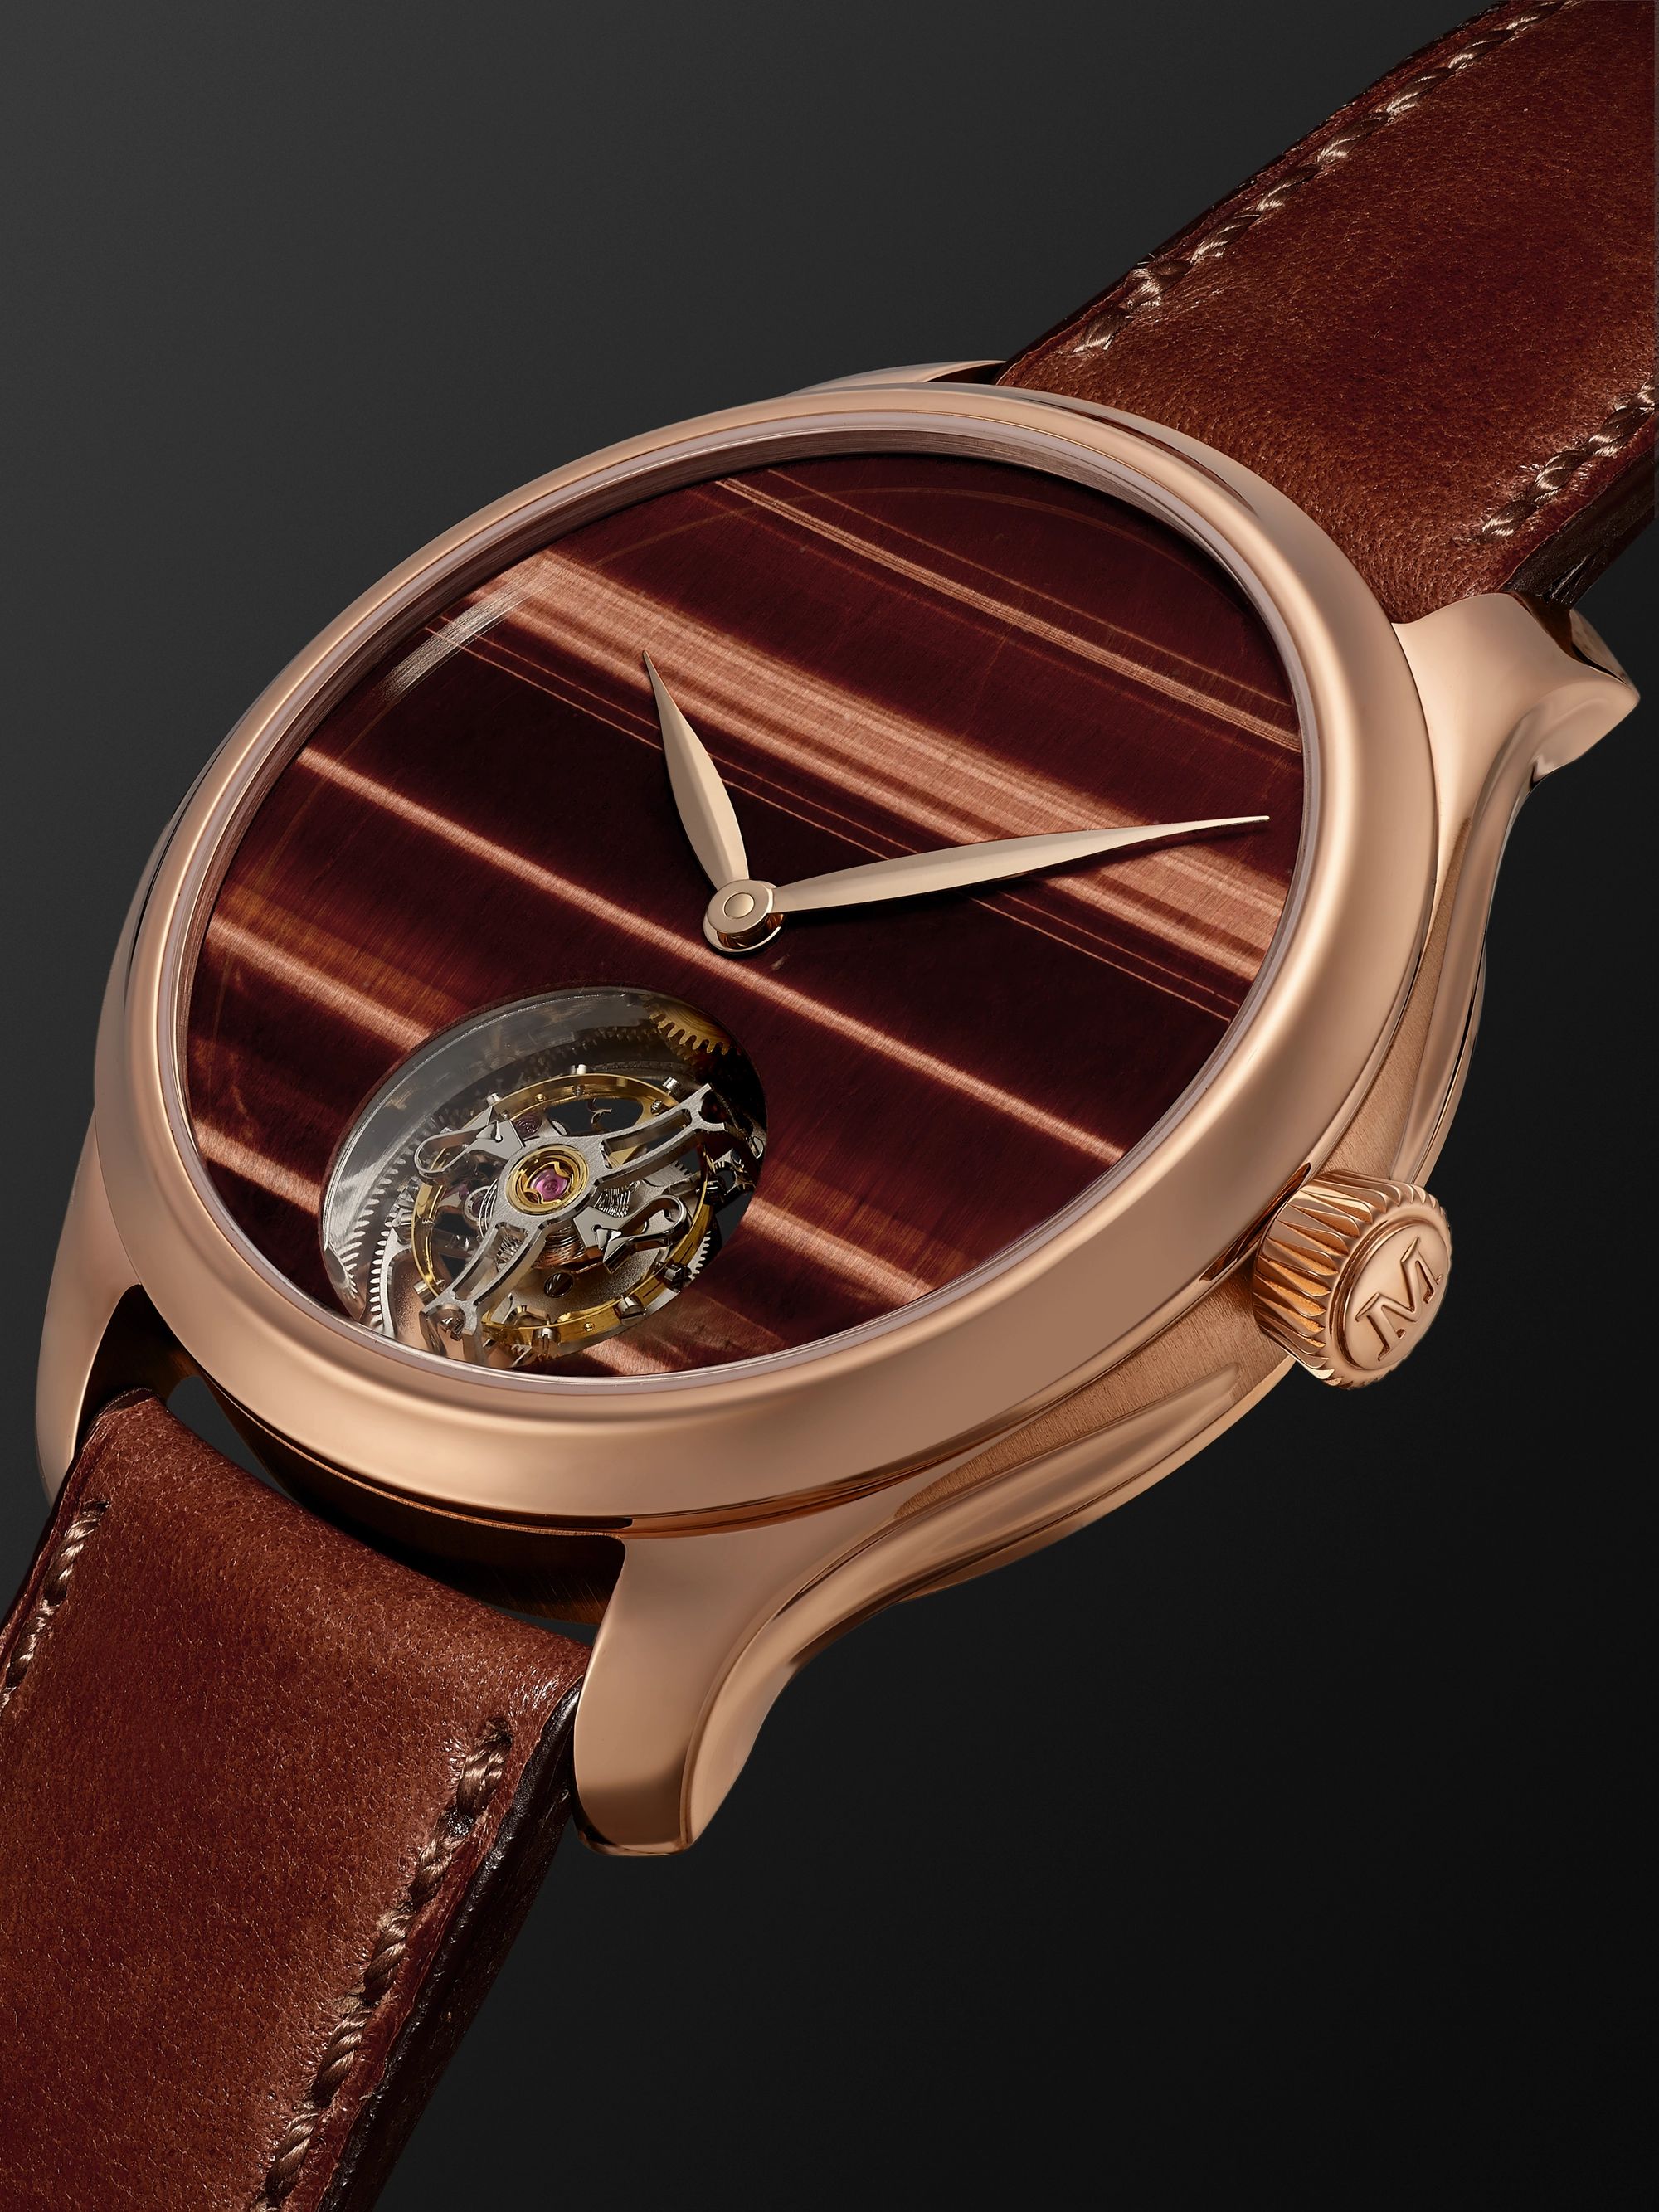 H. MOSER & CIE. Endeavour Tourbillion Ox's Eye Automatic 40mm 18-Karat Red Gold and Leather Watch, Ref. No. 1804-0401